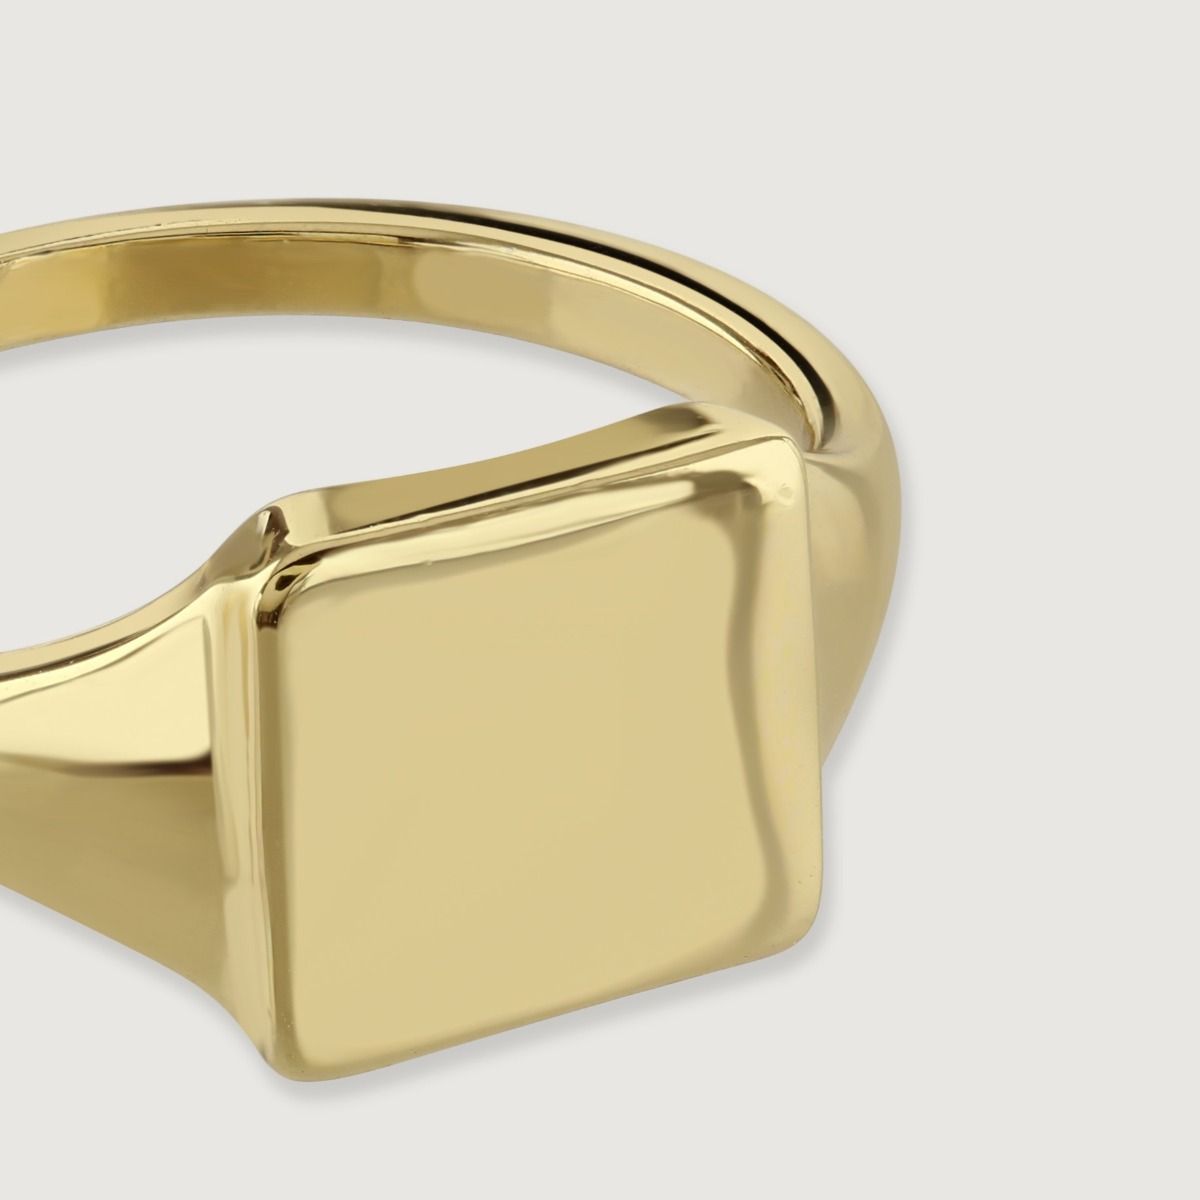 The Square Design Gold Signet Ring is a bold and sophisticated piece of jewellery. Crafted with exquisite detail, this ring showcases a sleek and modern square design on the signet. Made with luxurious gold, it exudes a sense of elegance and style, making